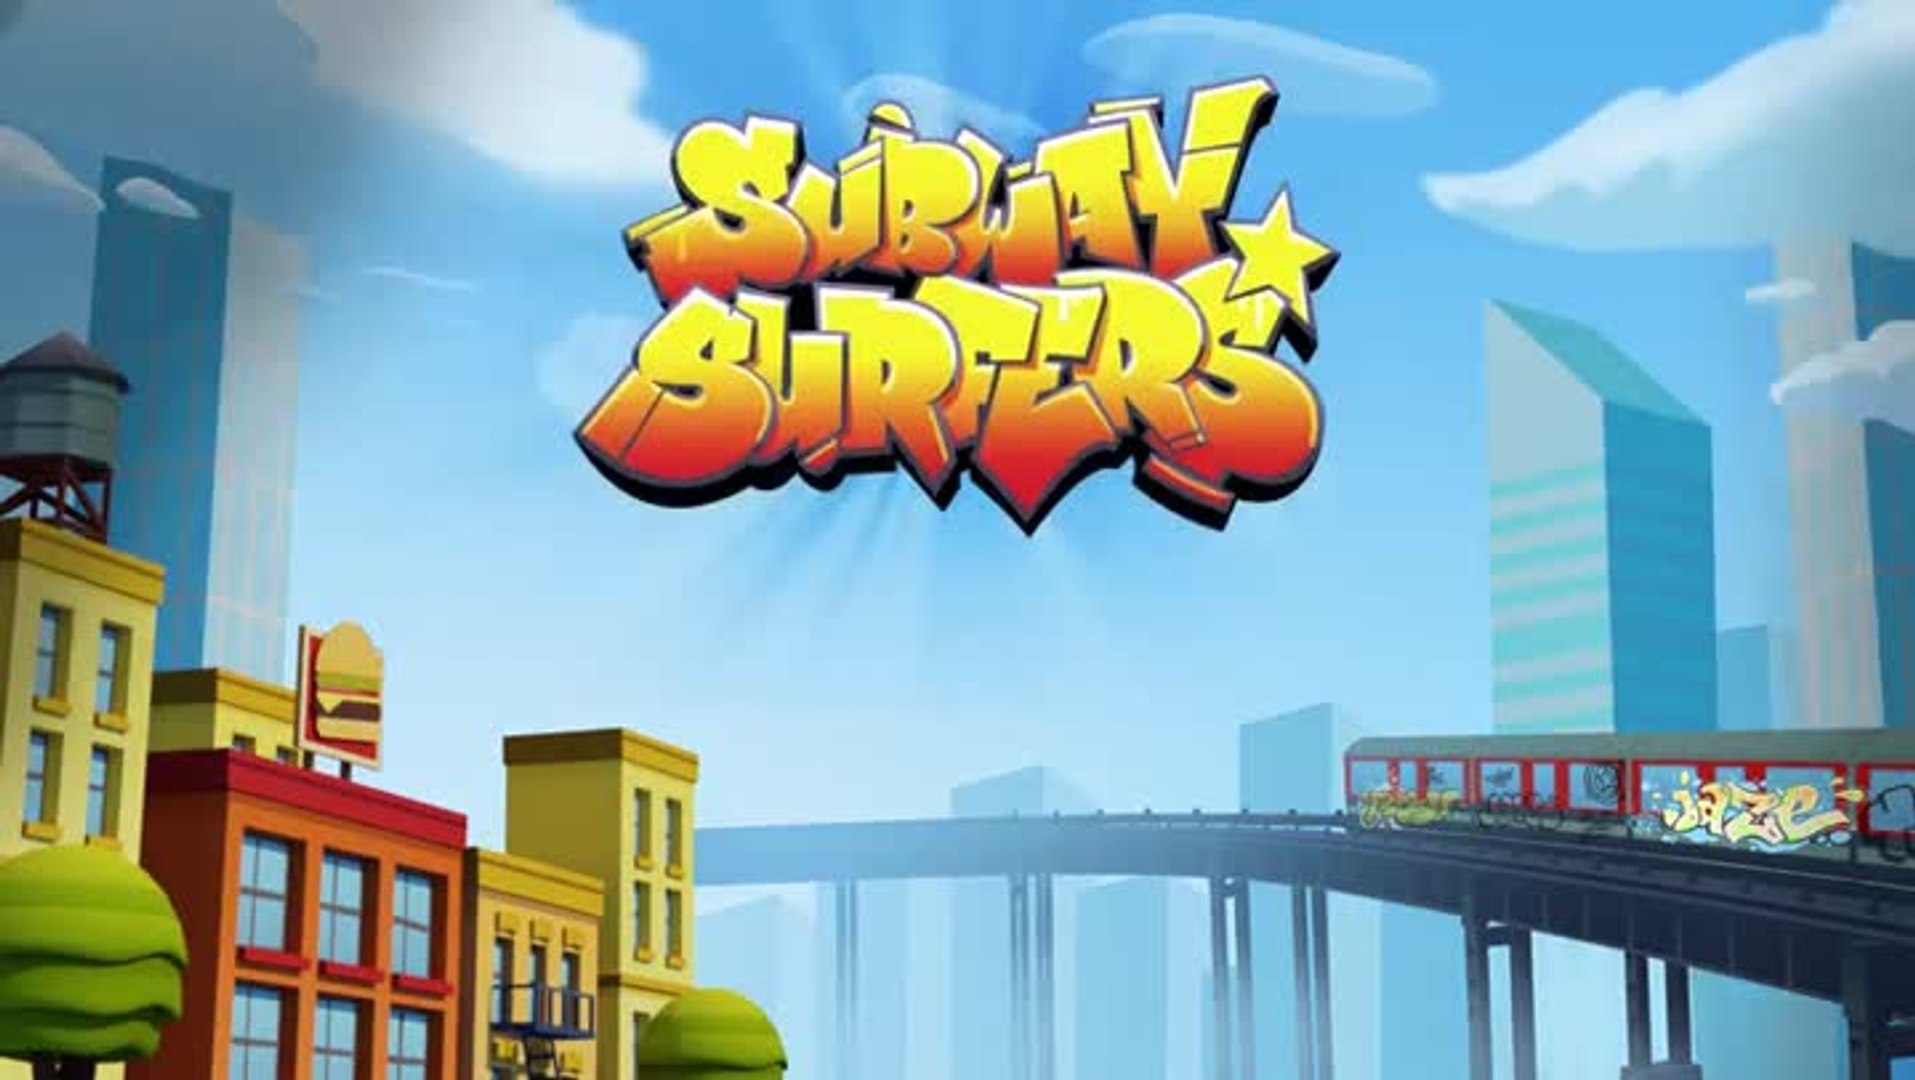 Subway Surfers Airtime, Launch Trailer